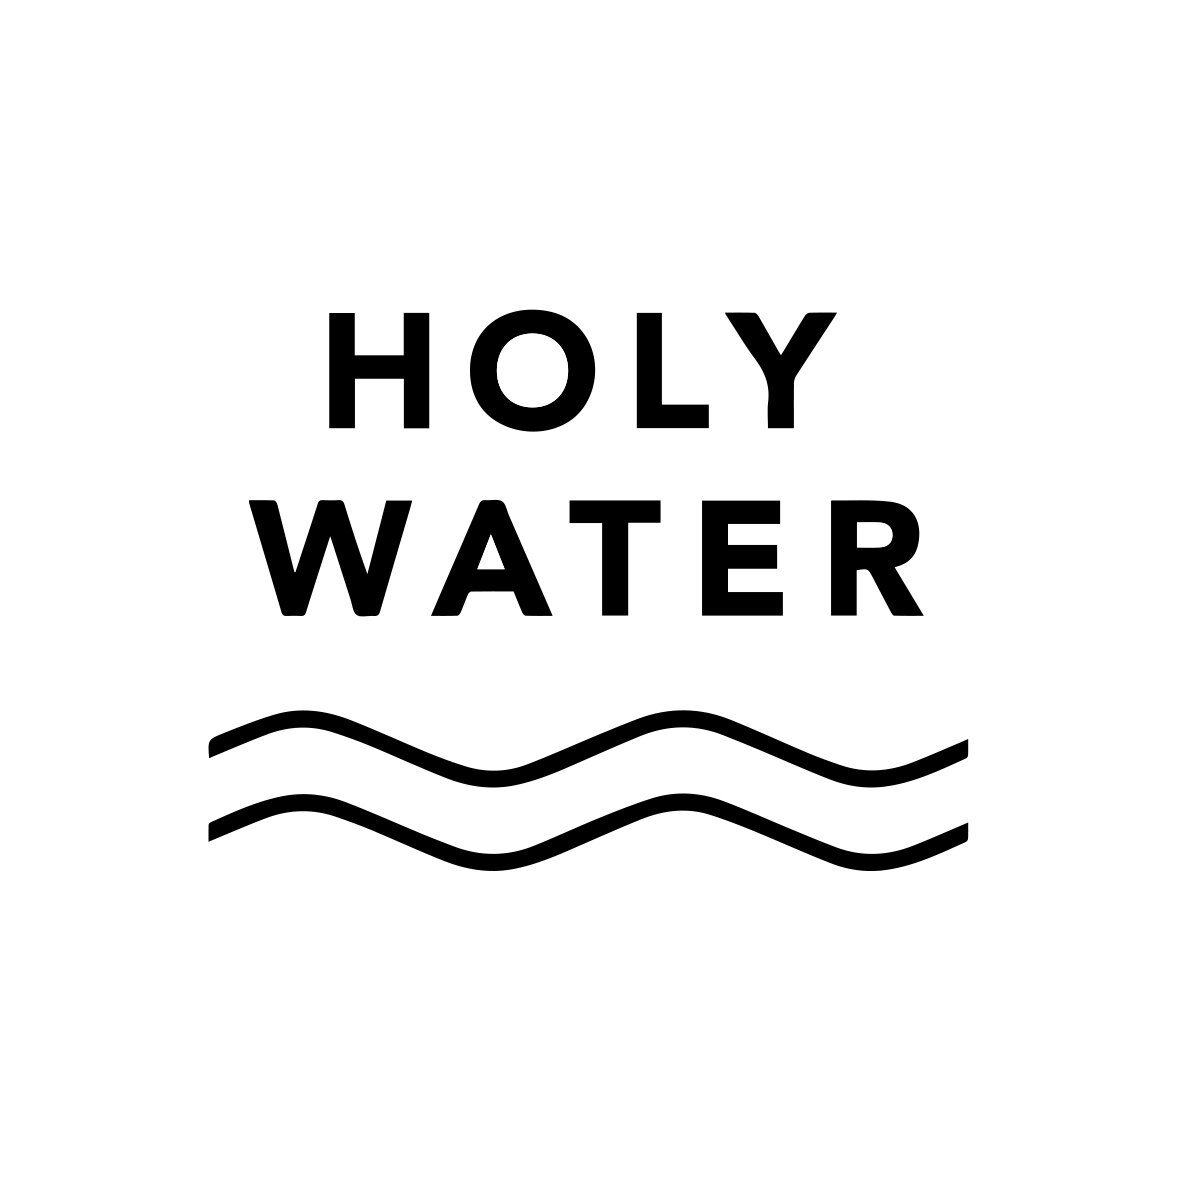 HOLY WATER 